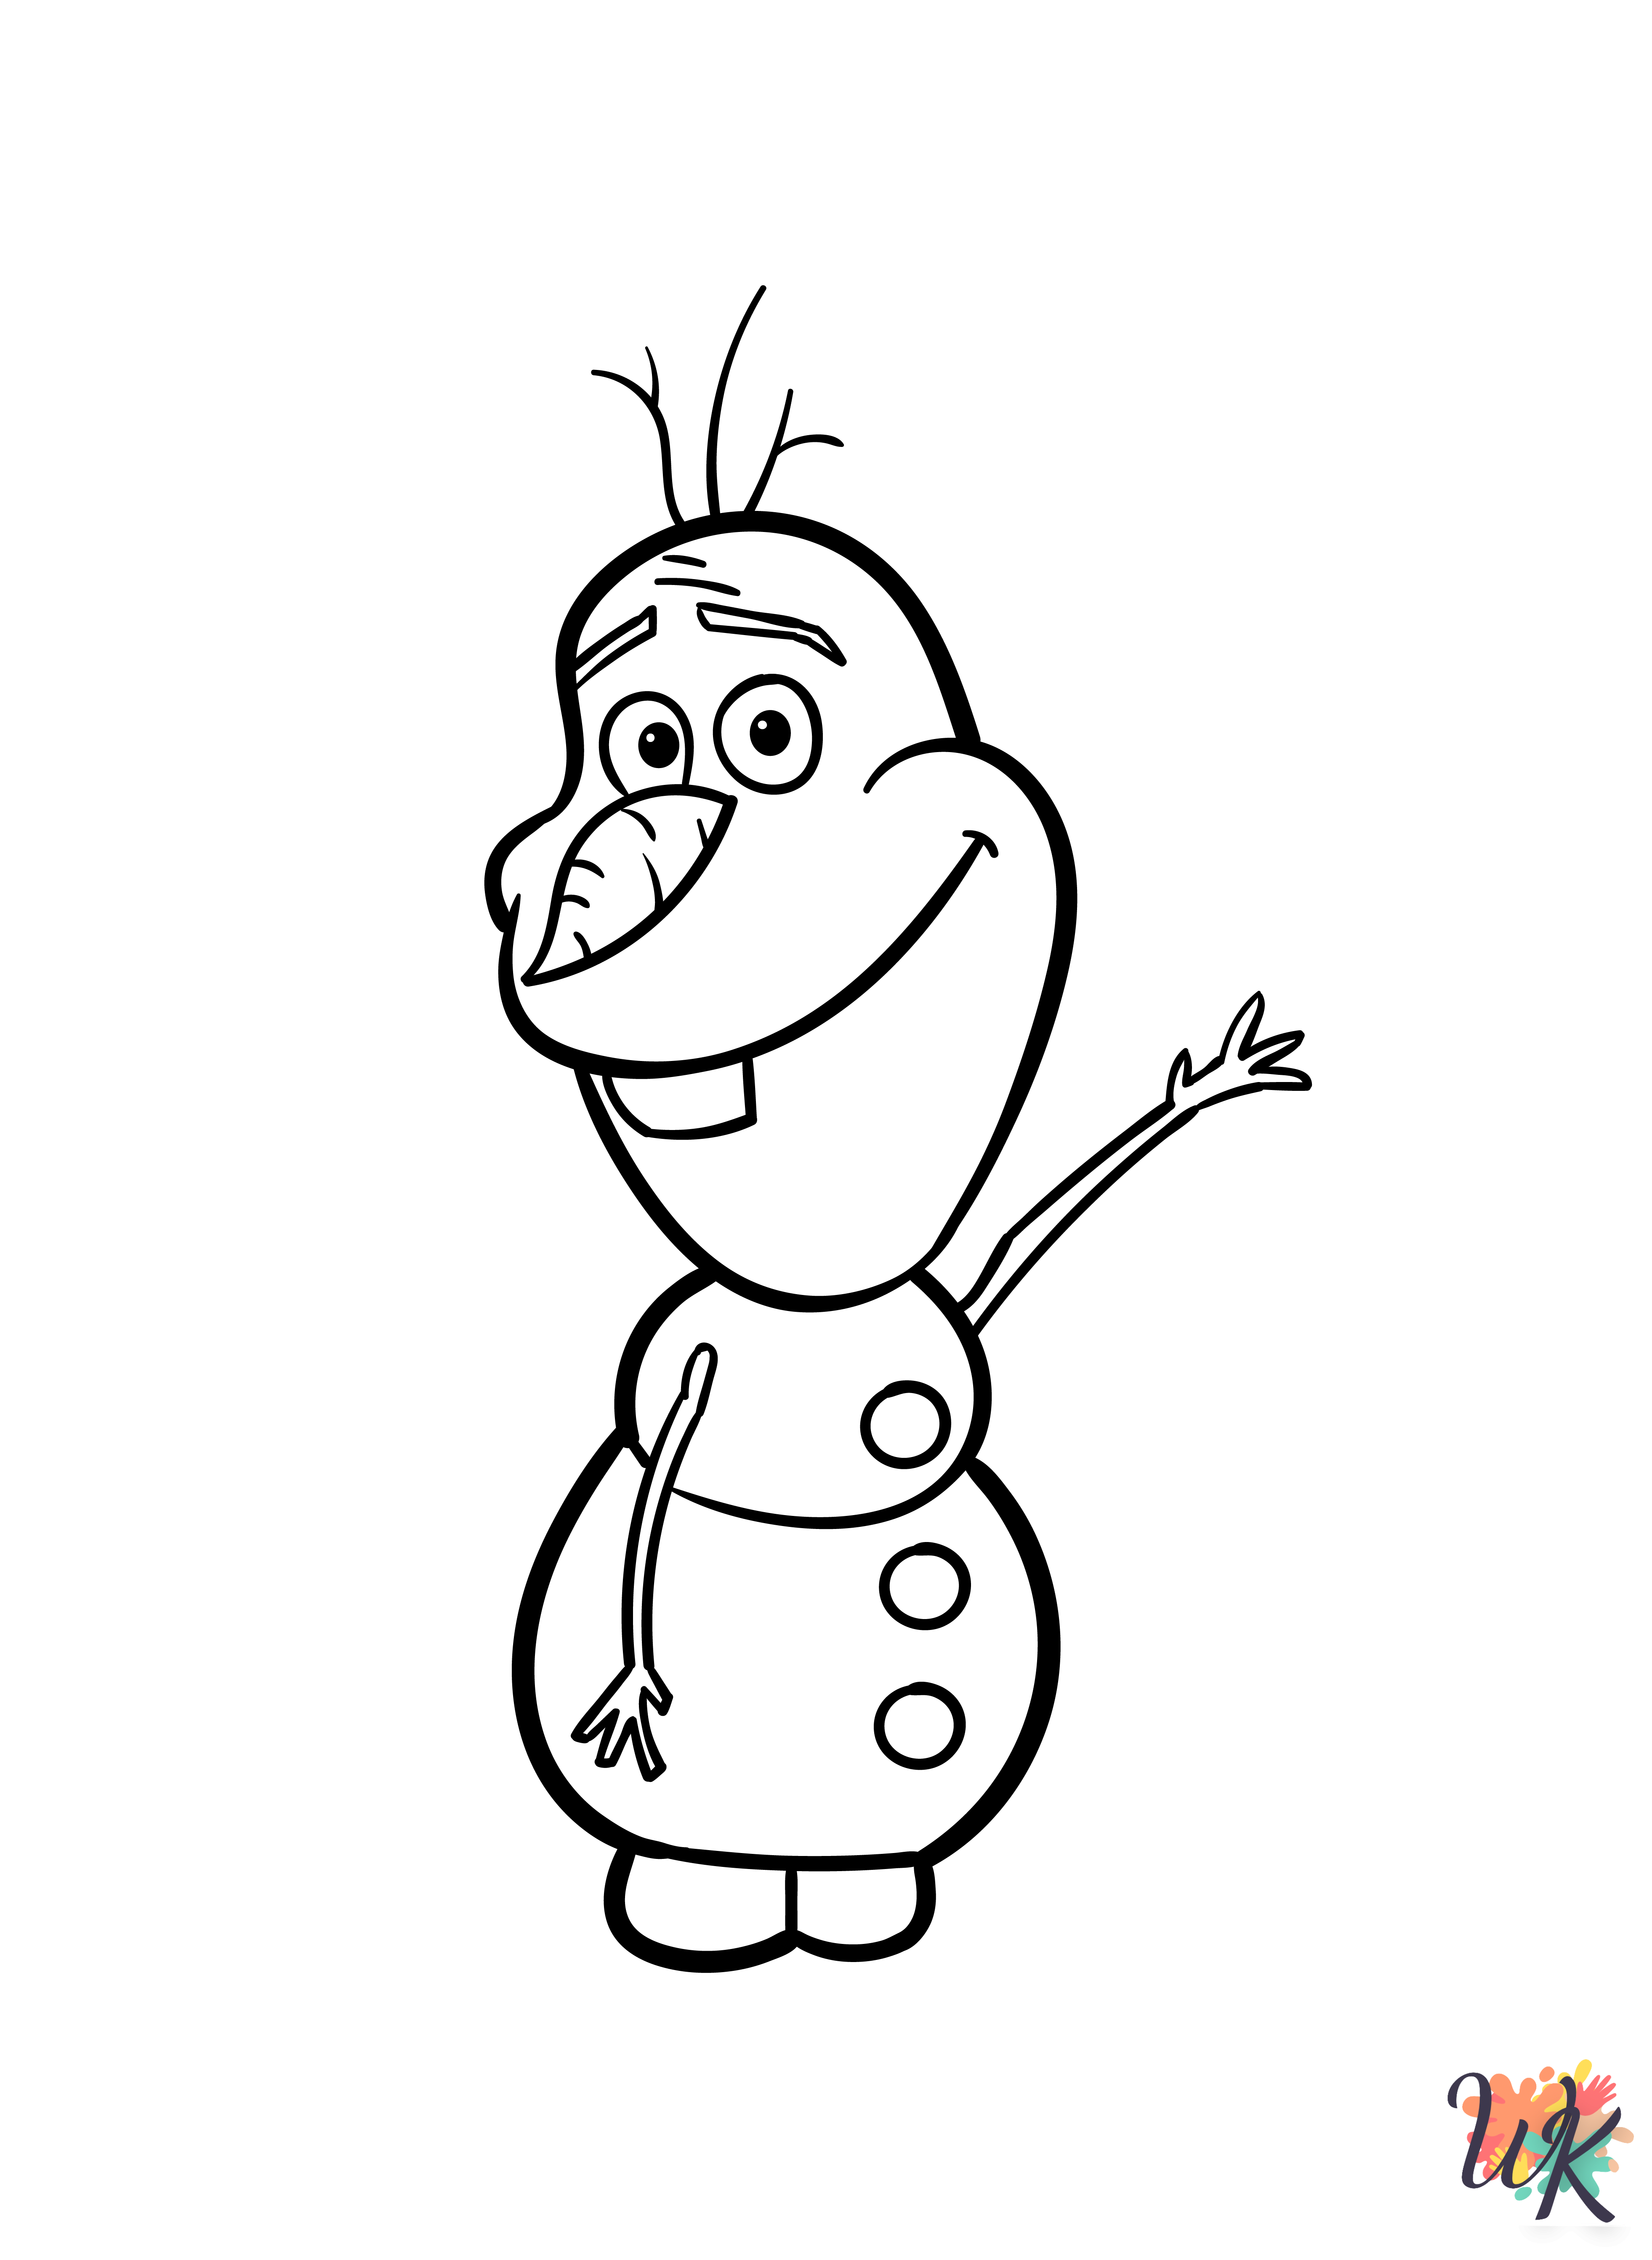 Olaf printable coloring pages